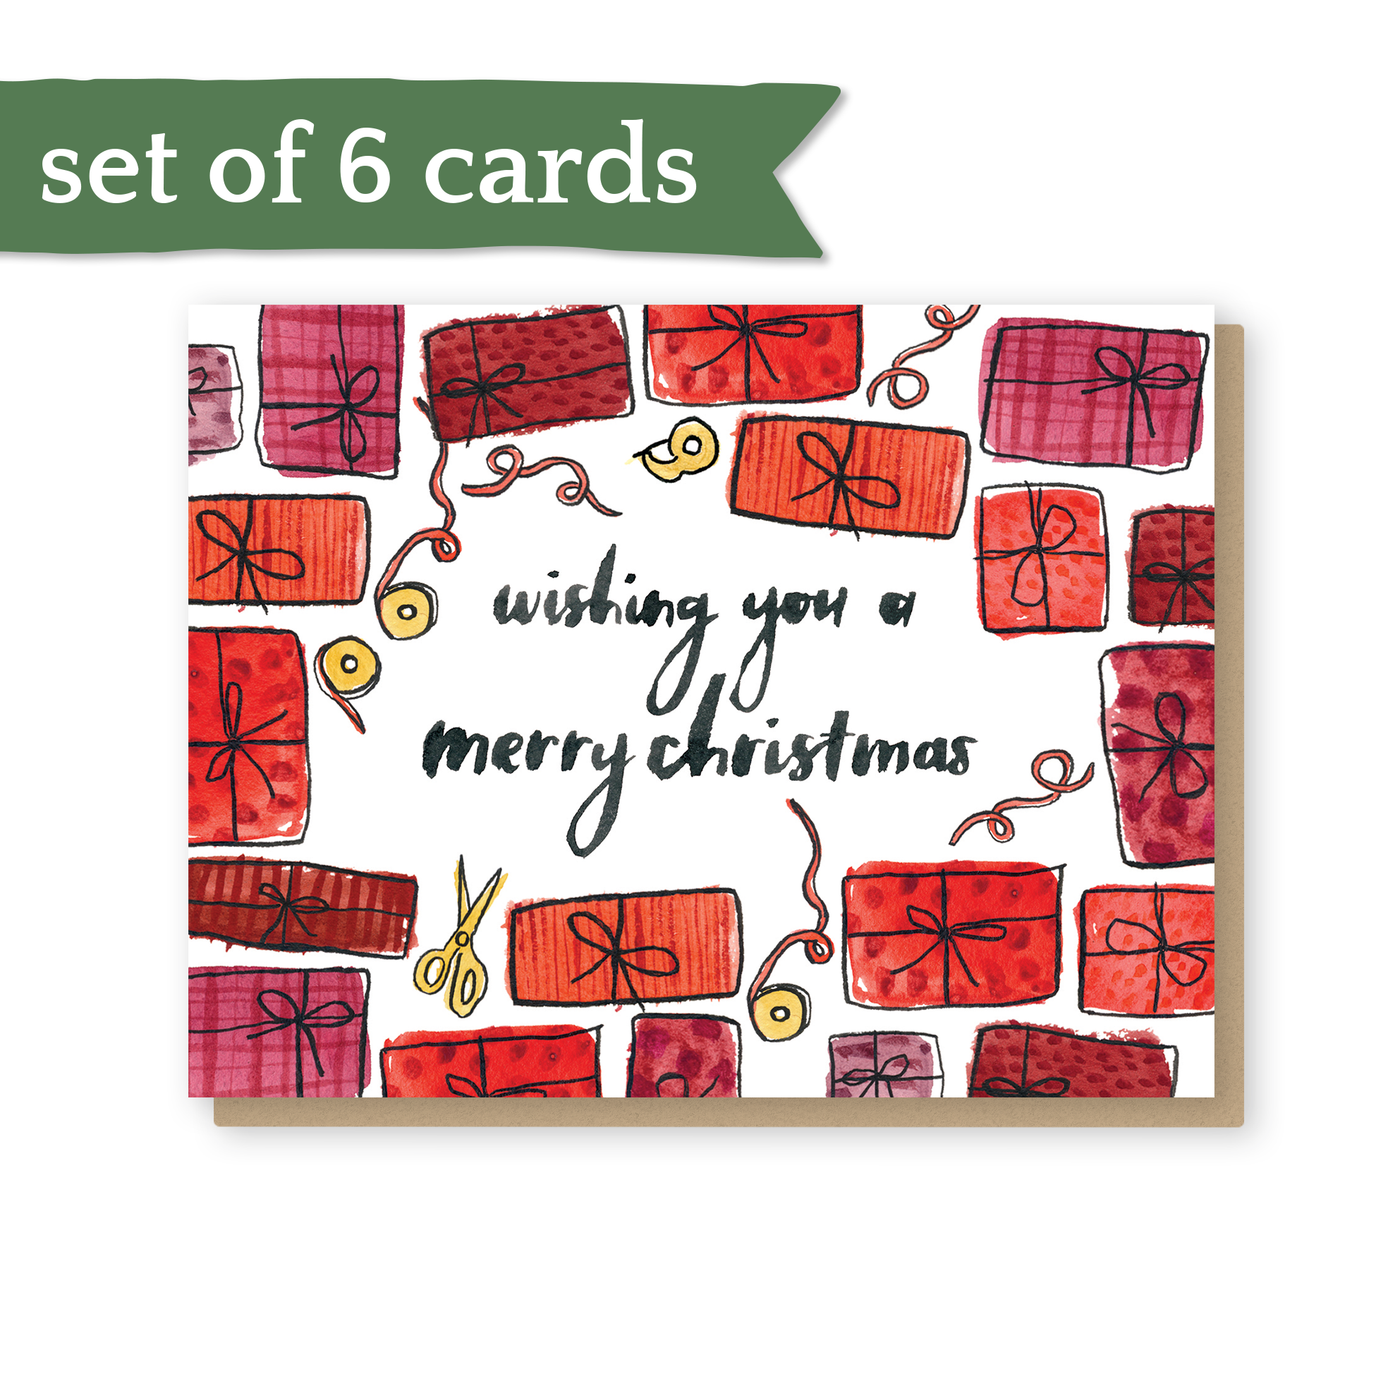 set of 6 Merry Christmas presents cards